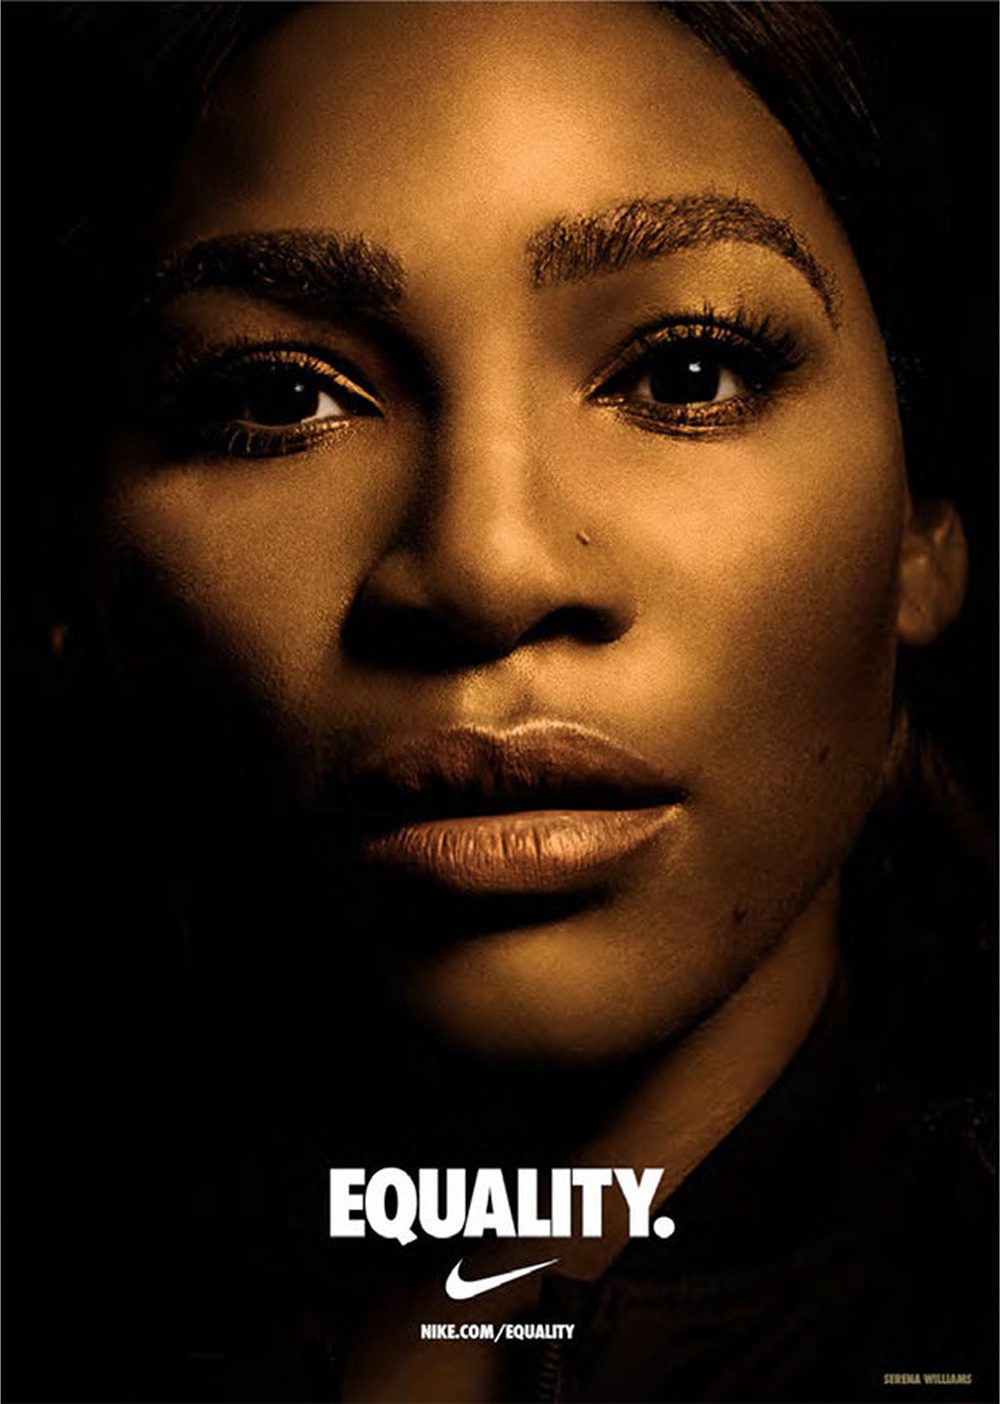 Case-by-Case-NYC-OPEN-topics-2018-Nike-equality-posters_2(Serena-Williams).jpg